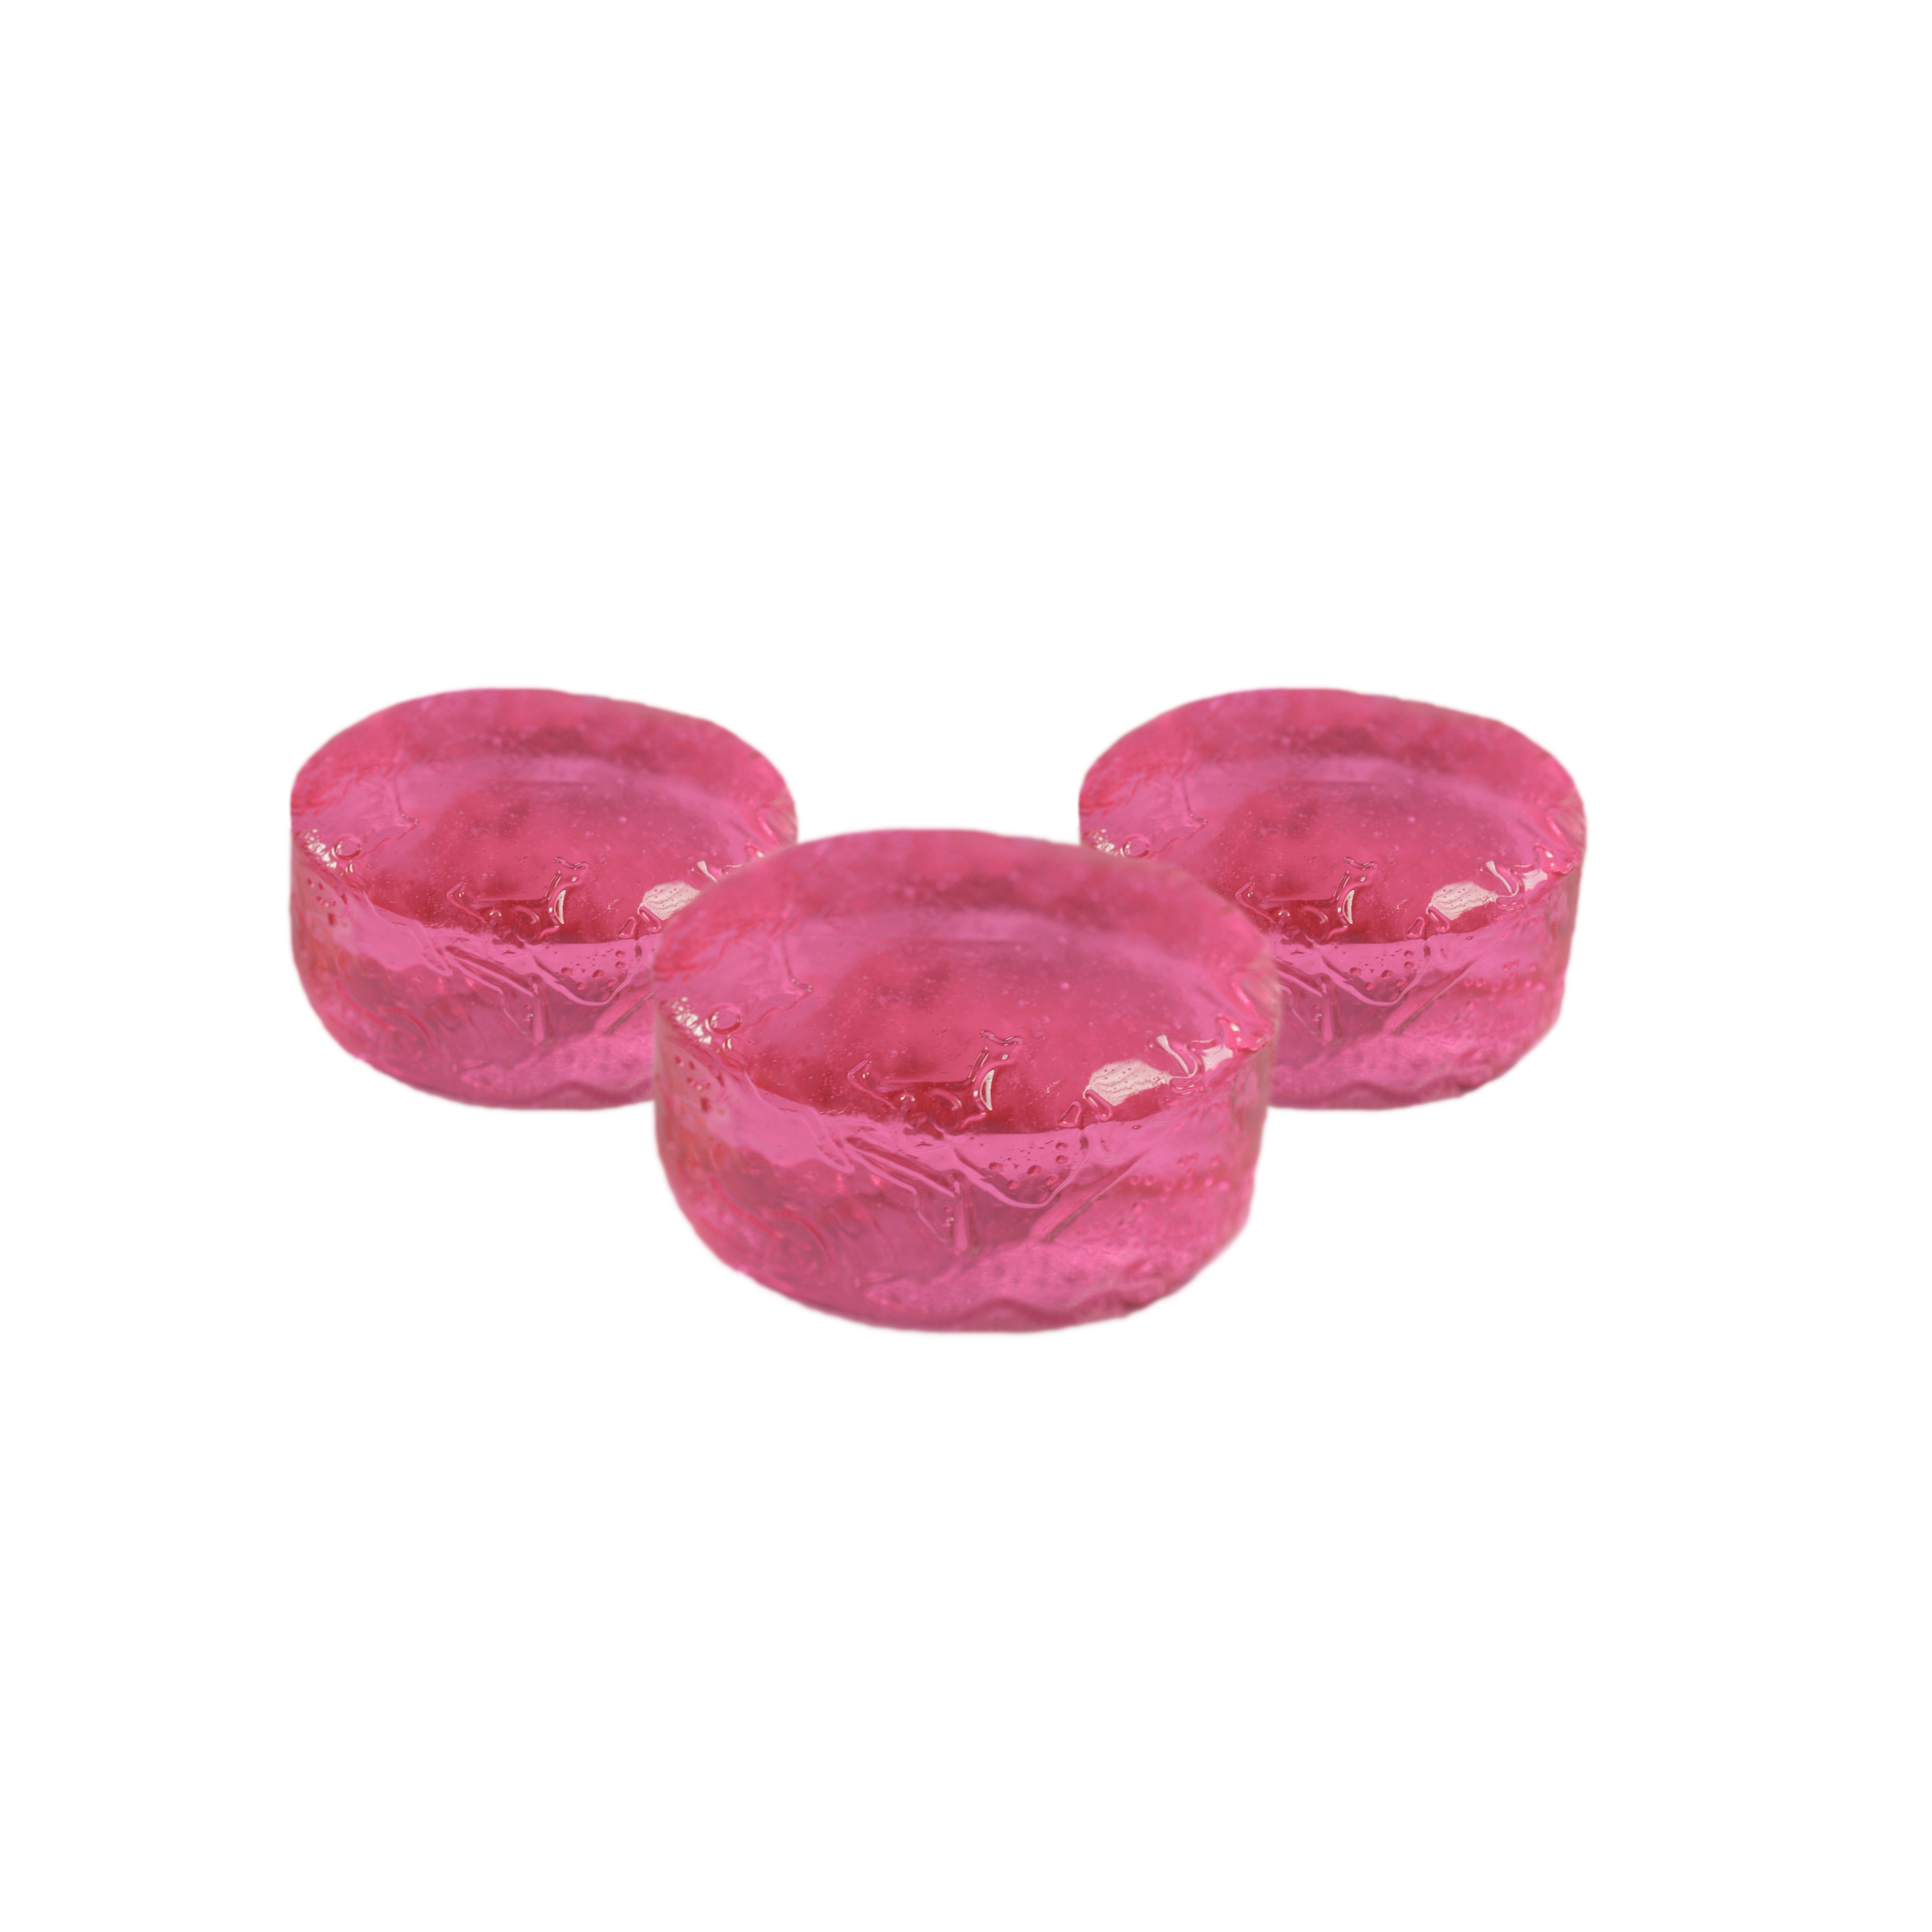 Hard Candy - Watermelon 4 Pack High Dose